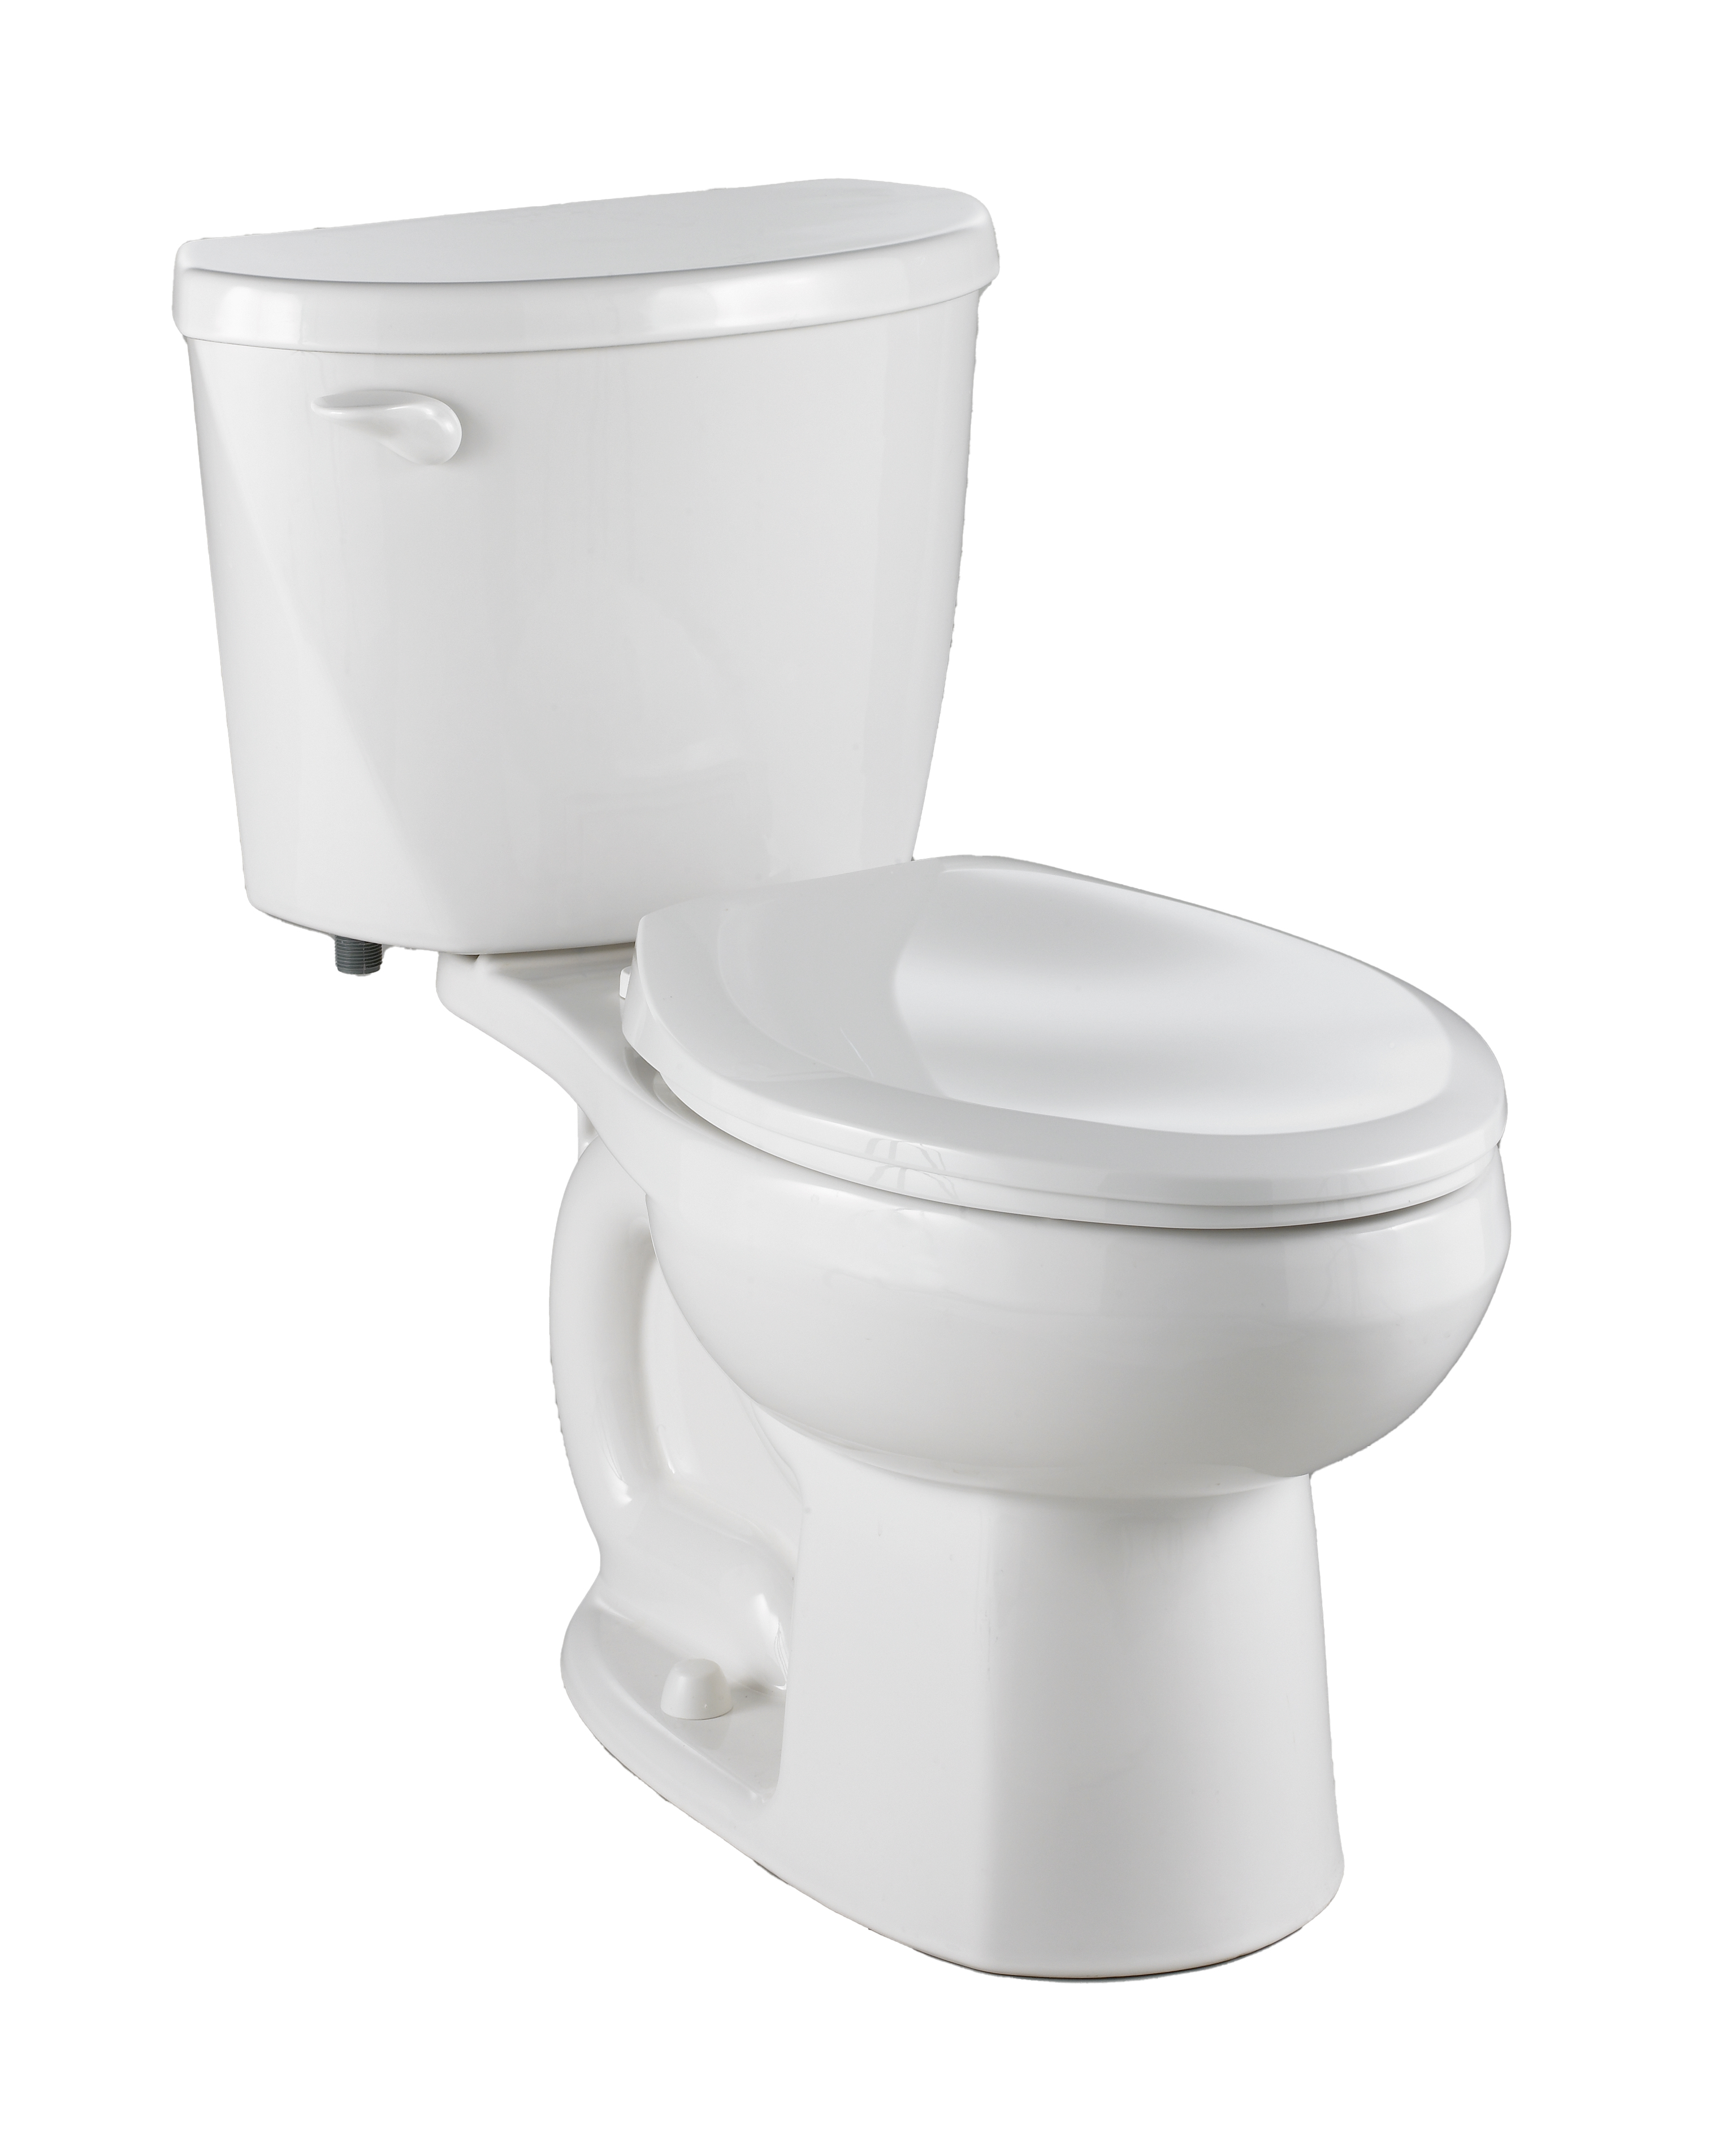 Evolution 2 Two-Piece 1.6 gpf/6.0 Lpf Chair Height Elongated Toilet Less Seat with Lined Tank